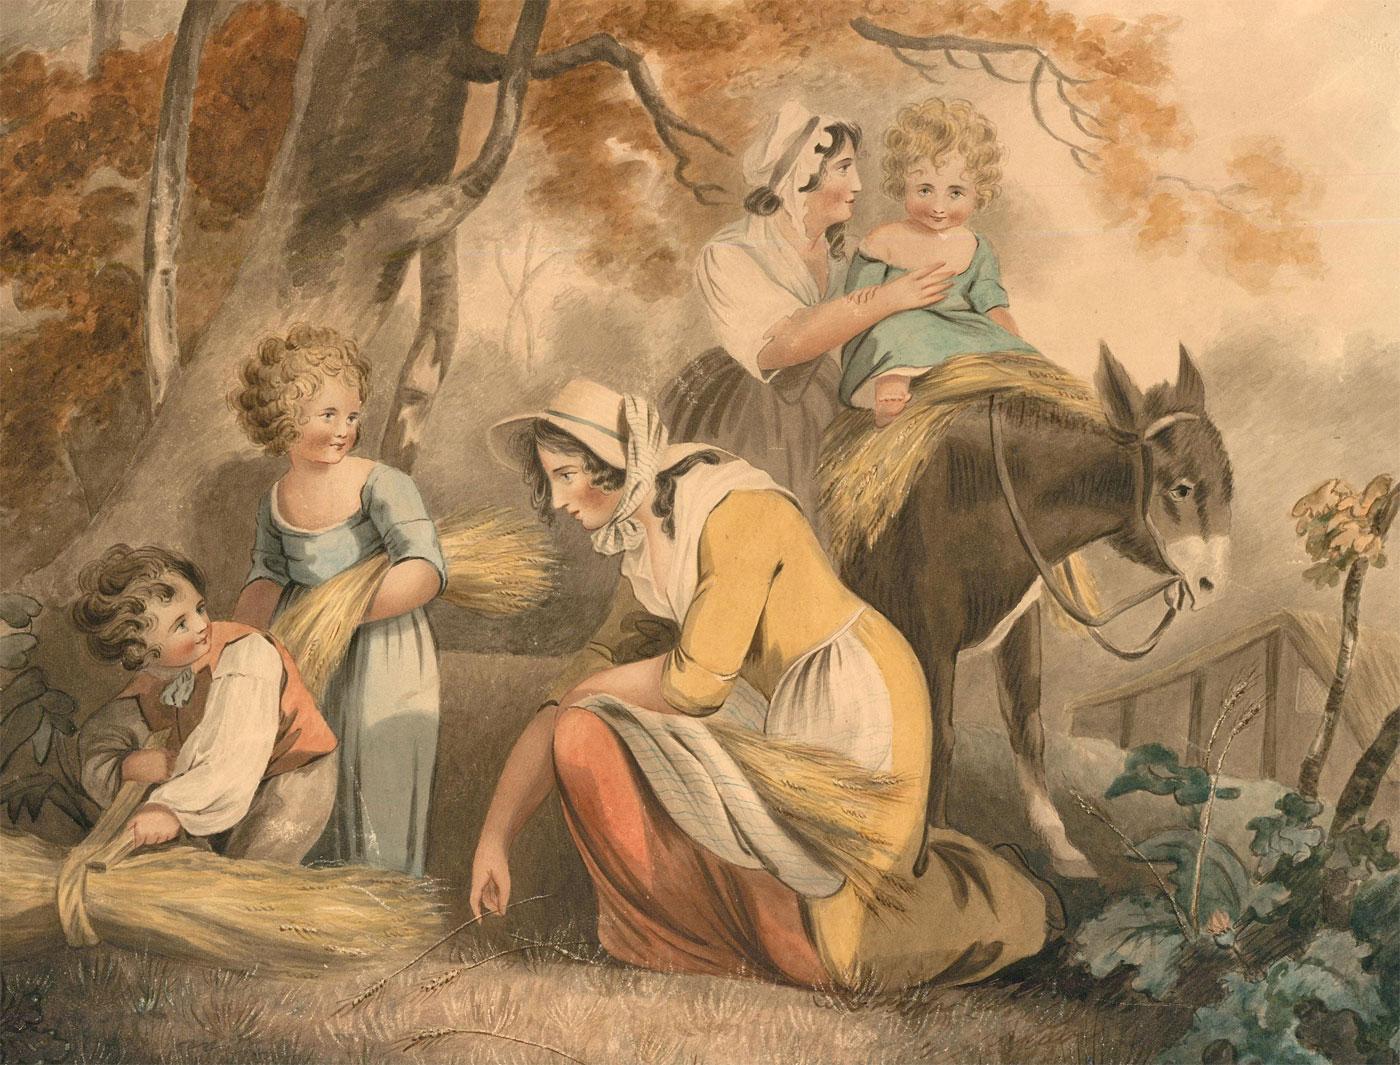 A wonderful and very detailed late 18th or very early 19th century watercolour study depicting a family harvesting hay in a woodland setting. This romantic interpretation of rural living is finely painted, with three small children gathering a